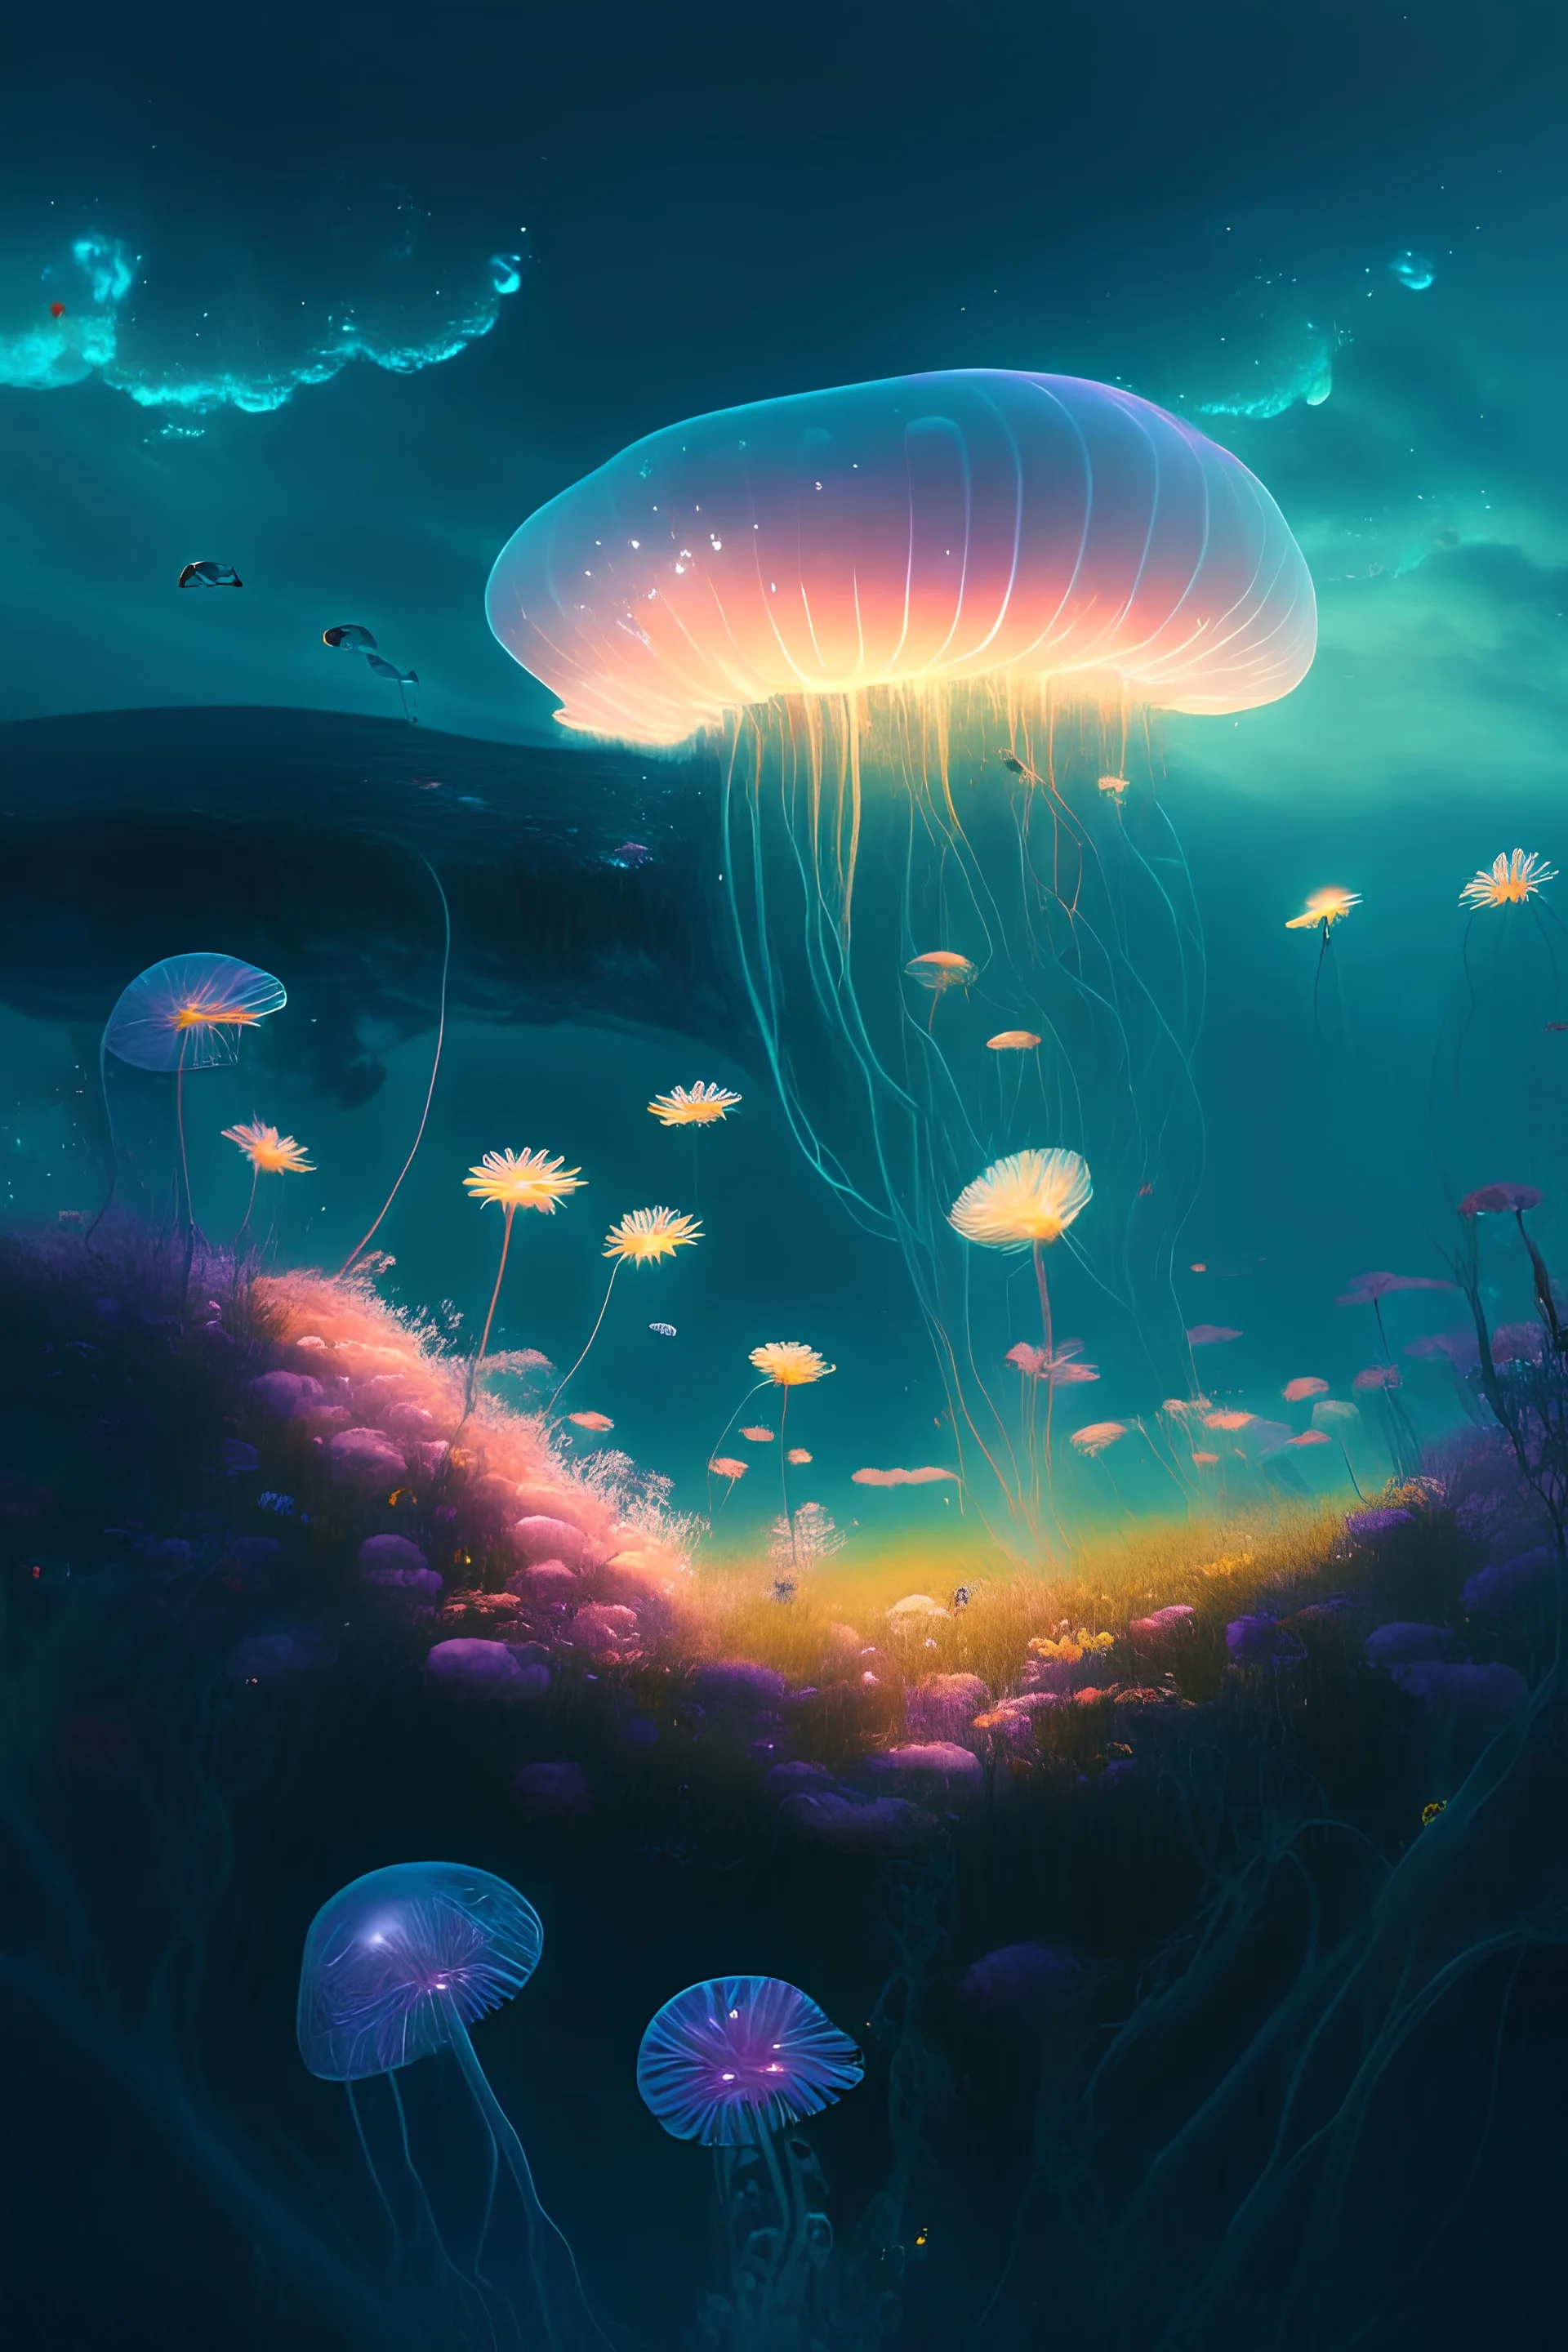 A dreamy, surrealist landscape where giant, floating jellyfish gently drift above a field of vibrant, bioluminescent flowers, casting an ethereal glow over the scene.